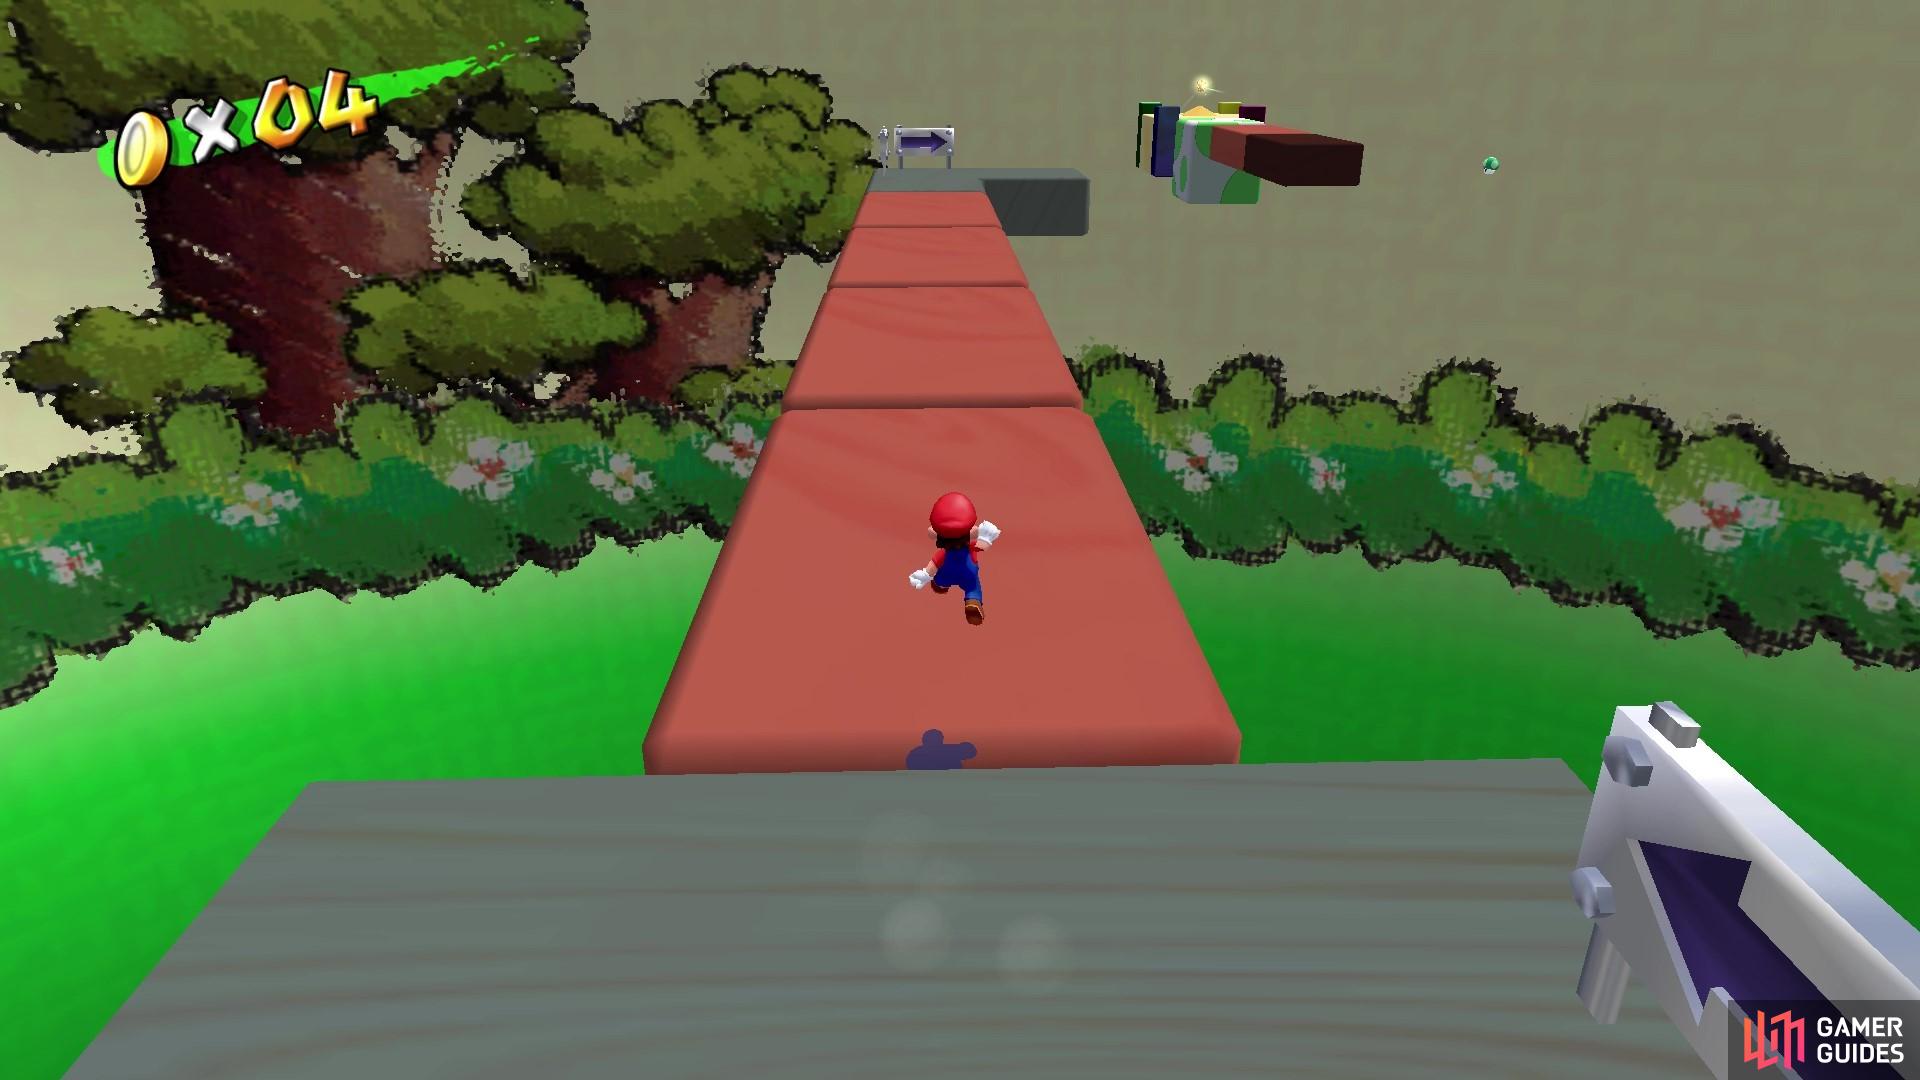 and make sure to jump right before the platforms spawn so you get a small head start!